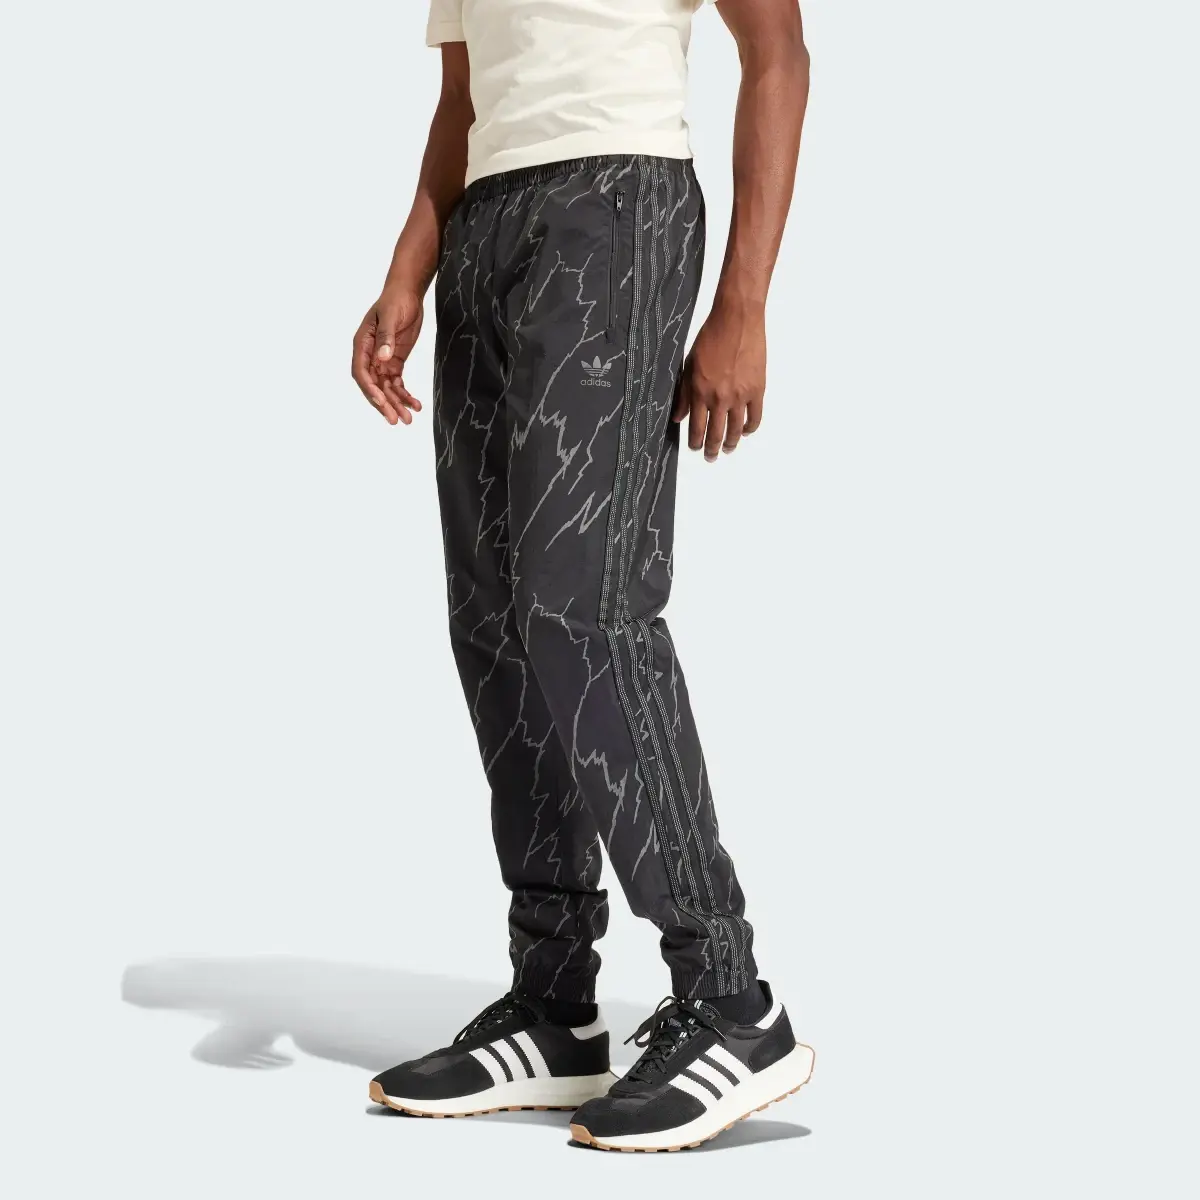 Adidas Track pants Allover Print SST. 2